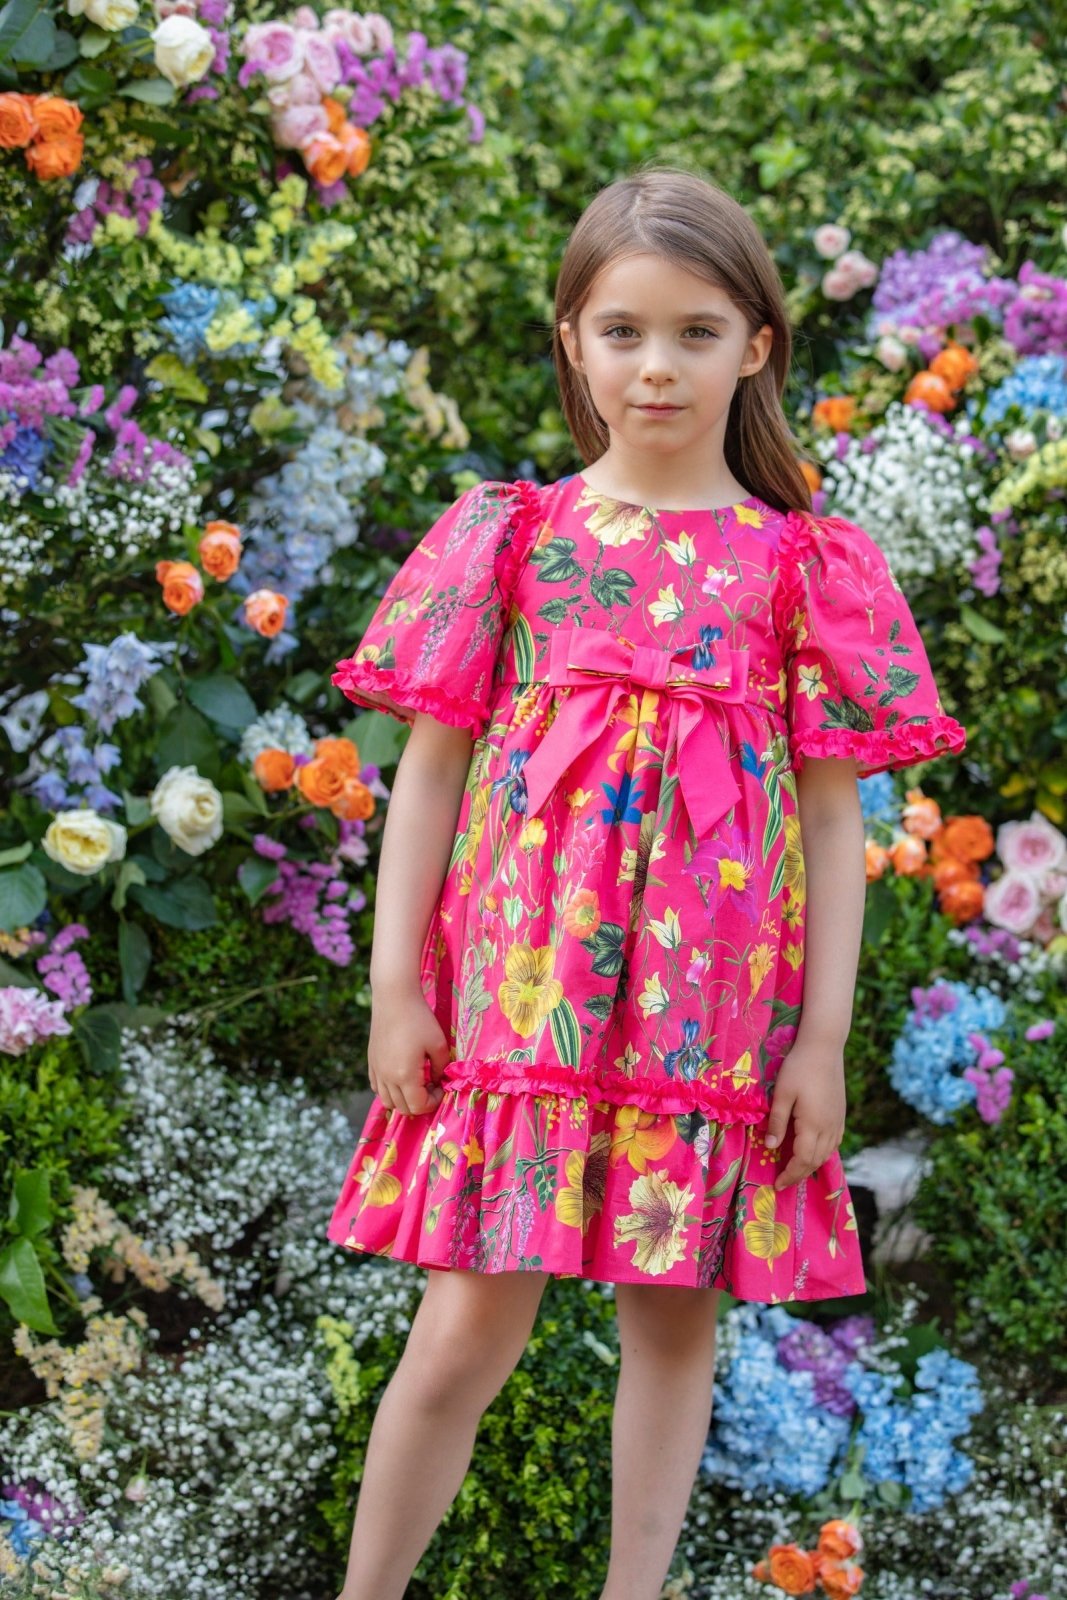 Blue and pink fuchsia dress, Girls 2-14 years old